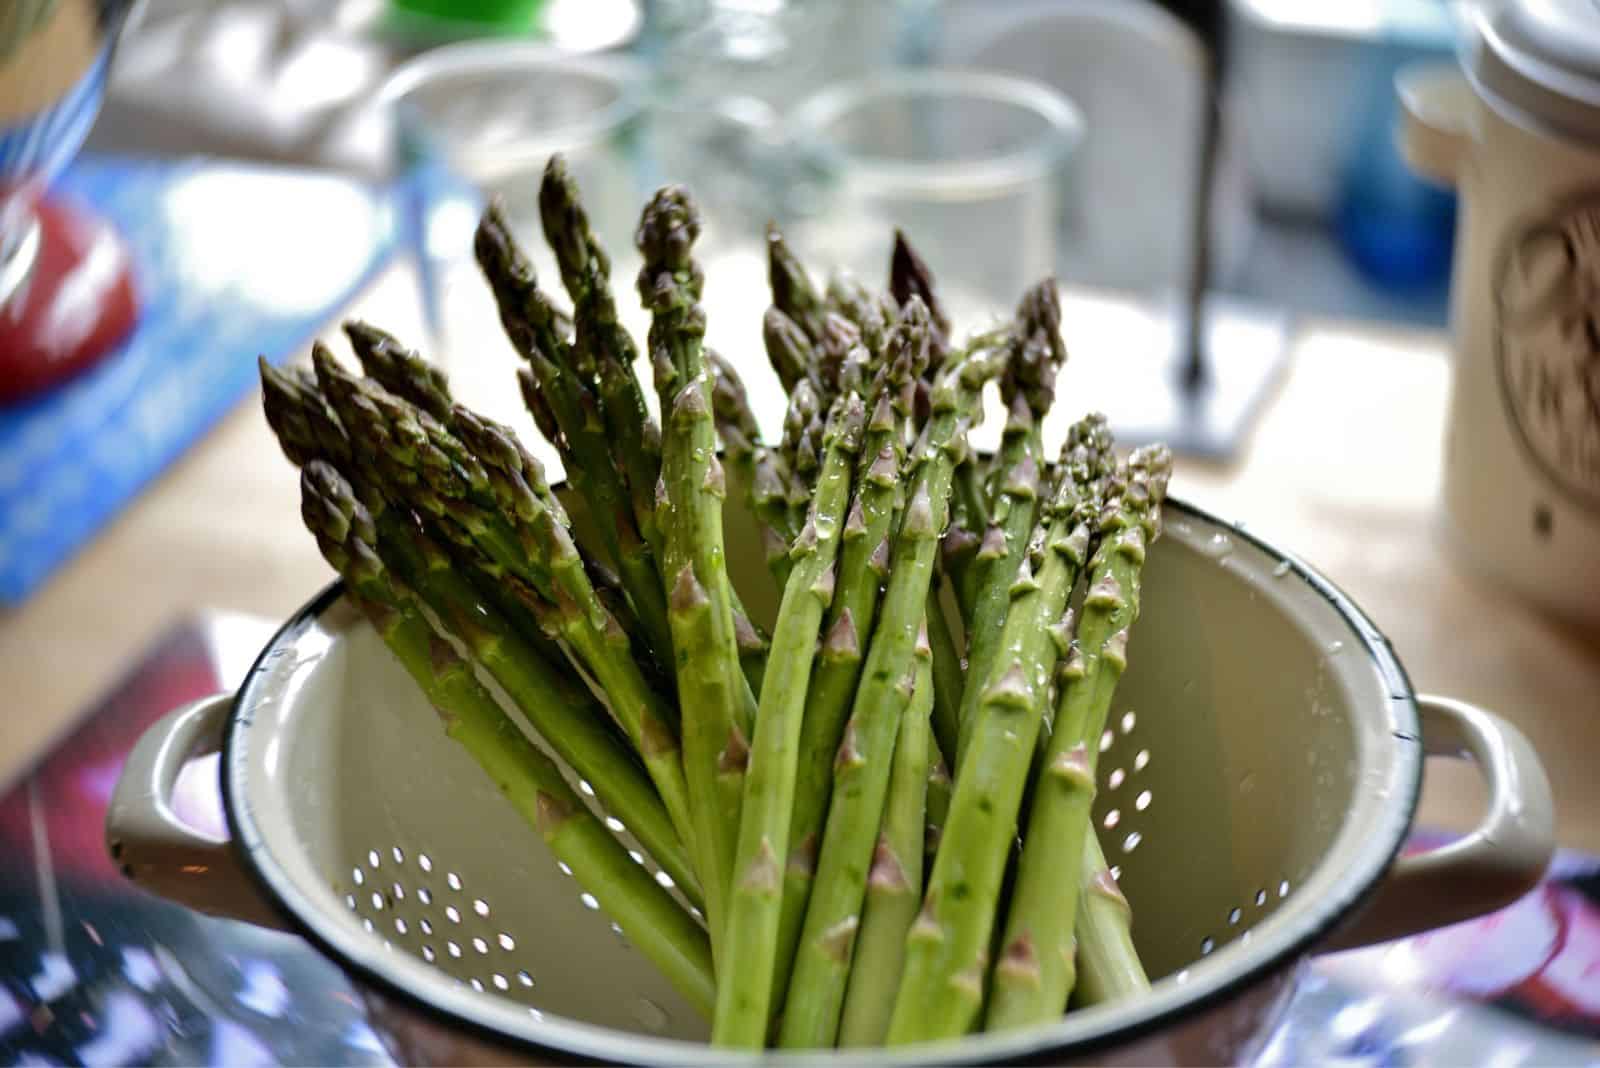 bunch of Asparagus on the table